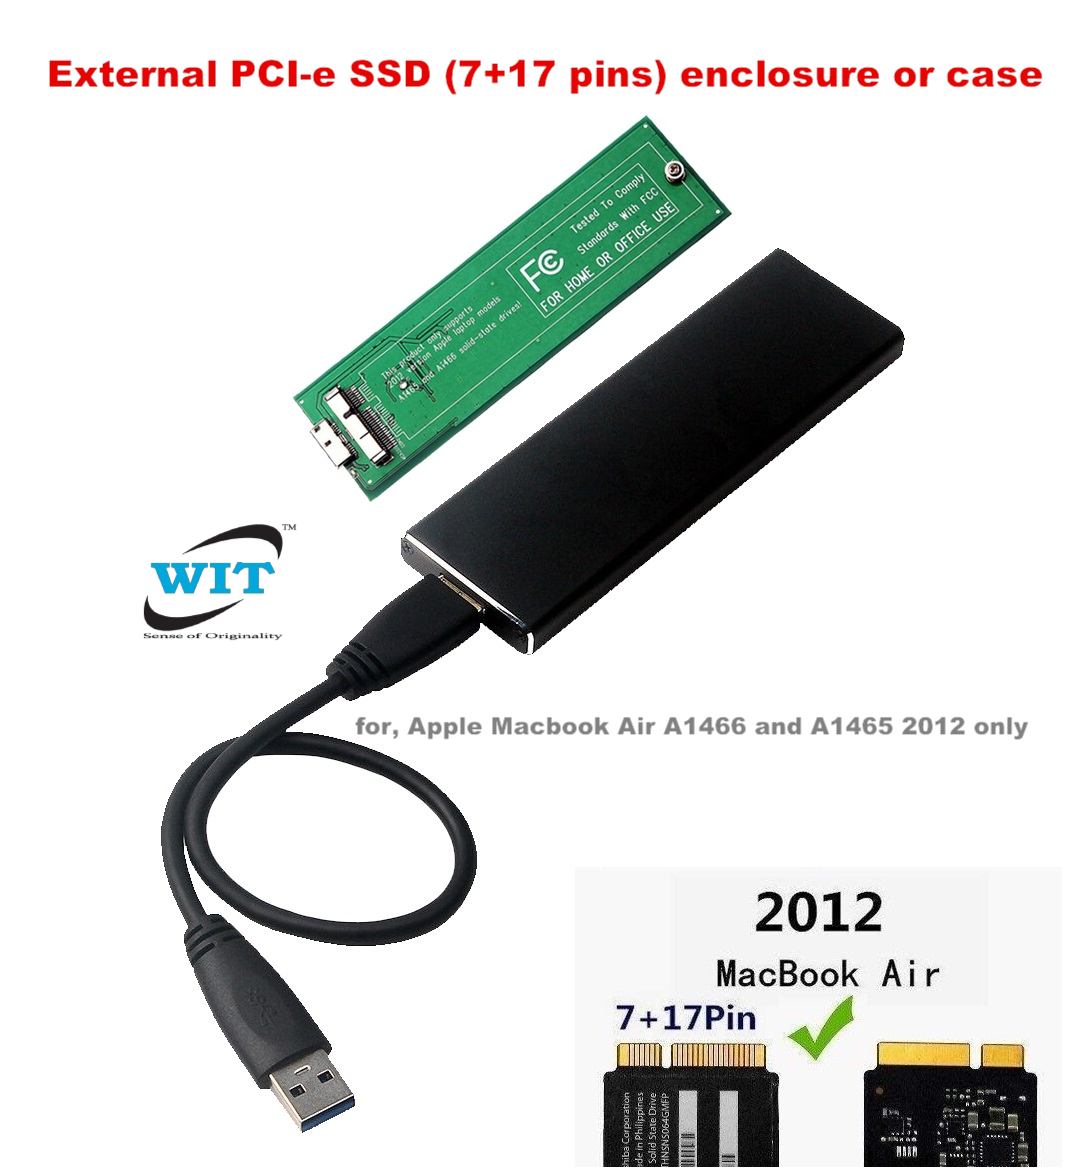 External PCI-e SSD (7+17 pins) enclosure or case for Apple Macbook A1466 and A1465 2012 USB 3.0 to Macbook Air A1466, A1465 (2012 only) SSD adapter - Computers